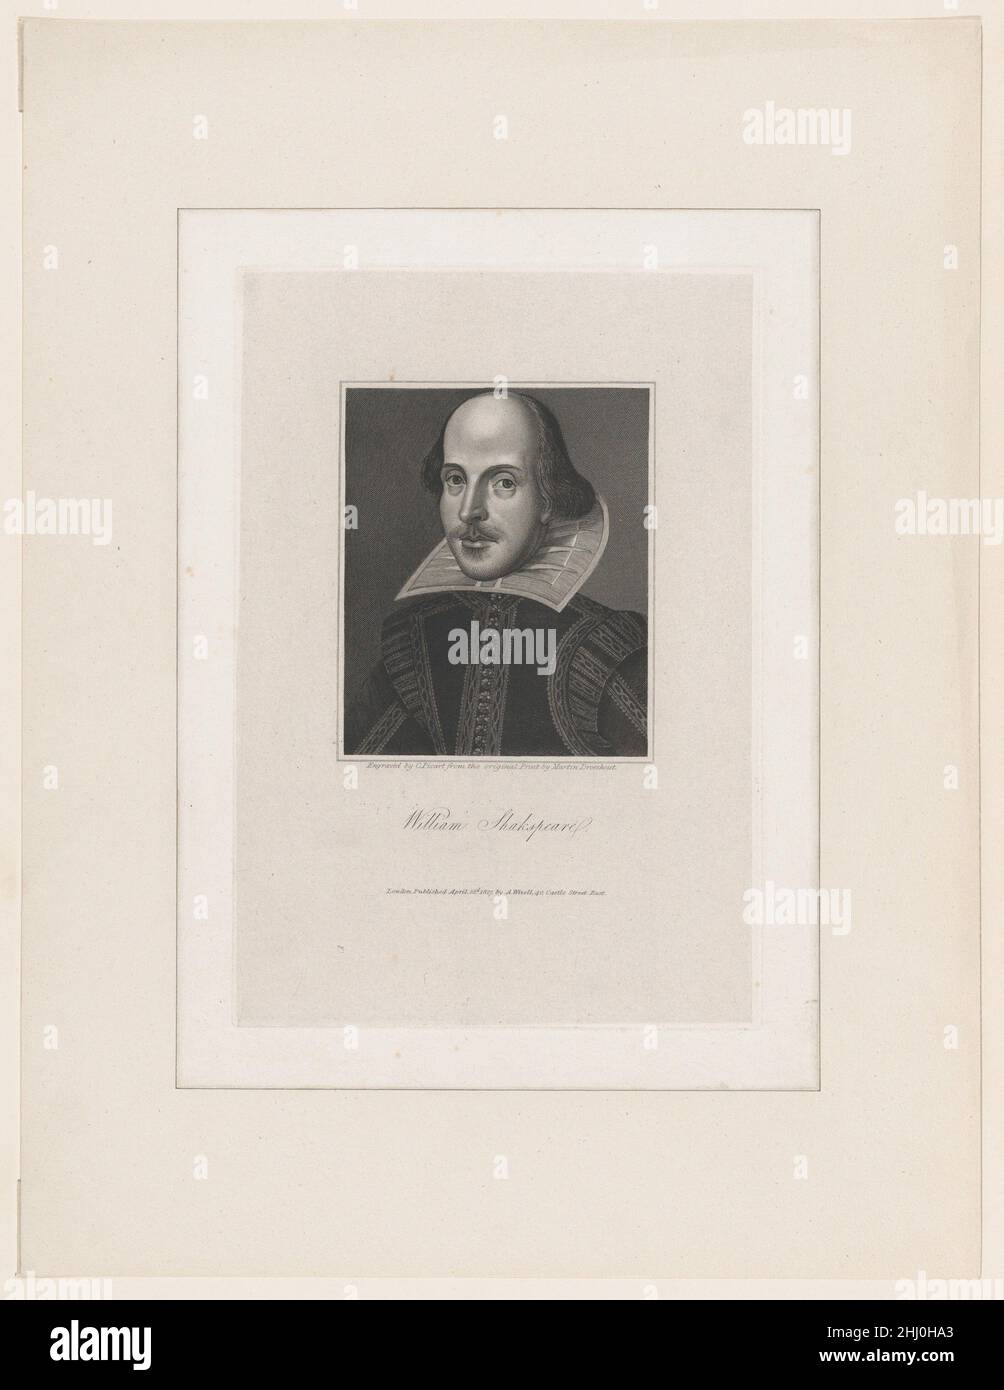 William Shakespeare 1827 Charles Picart Created for Abraham Wivell's 'Inquiry into the History of the Shakespeare Portraits' (1827), Picart's print accurately reduces Droeshout's famous title page engraving in the First Folio (1623). The Bard is distinguished by his prominent forehead, long hair covering his ears, mustache and mouche (patch of hair below his lower lip). He wears a starched white collar, a doublet adorned with lace or braid, and fastened by covered buttons. Since the original image was approved by actor friends of Shakespeare, who edited the 1623 publication, and accompanied by Stock Photo